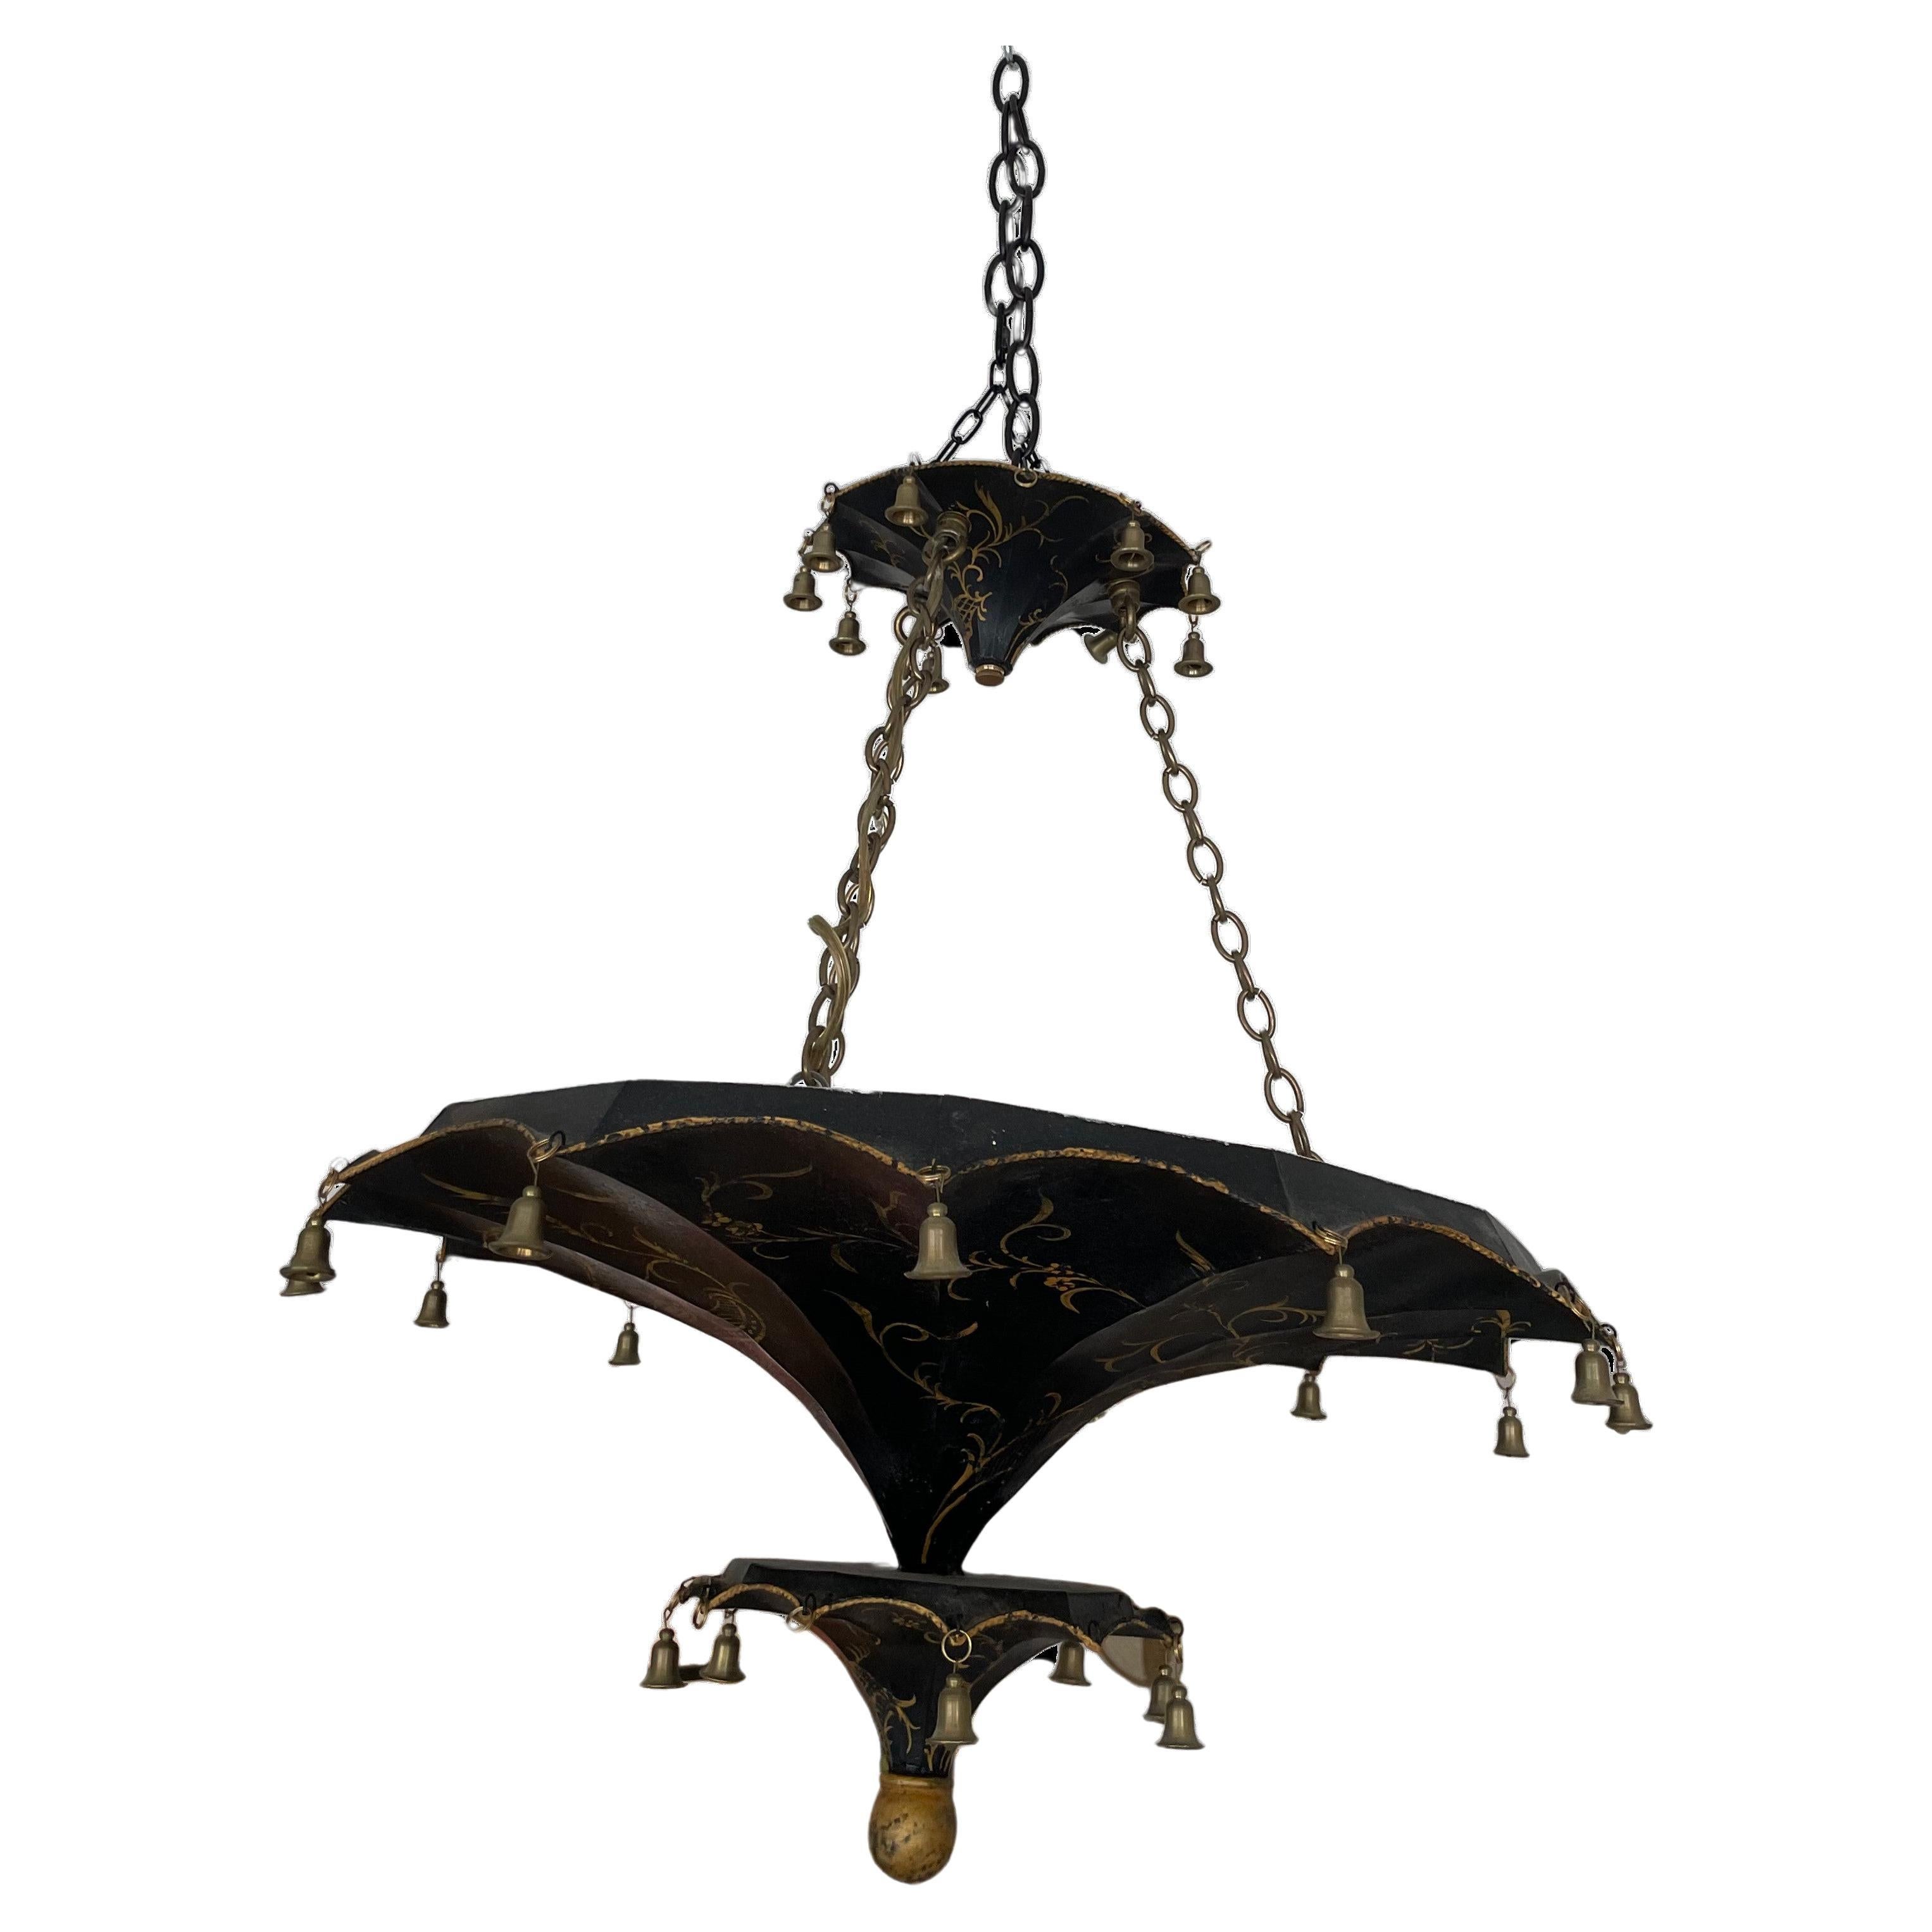 Vintage Two-Tier inverted Umbrella Chinoiserie Pagoda Chandelier w/ Brass Bells